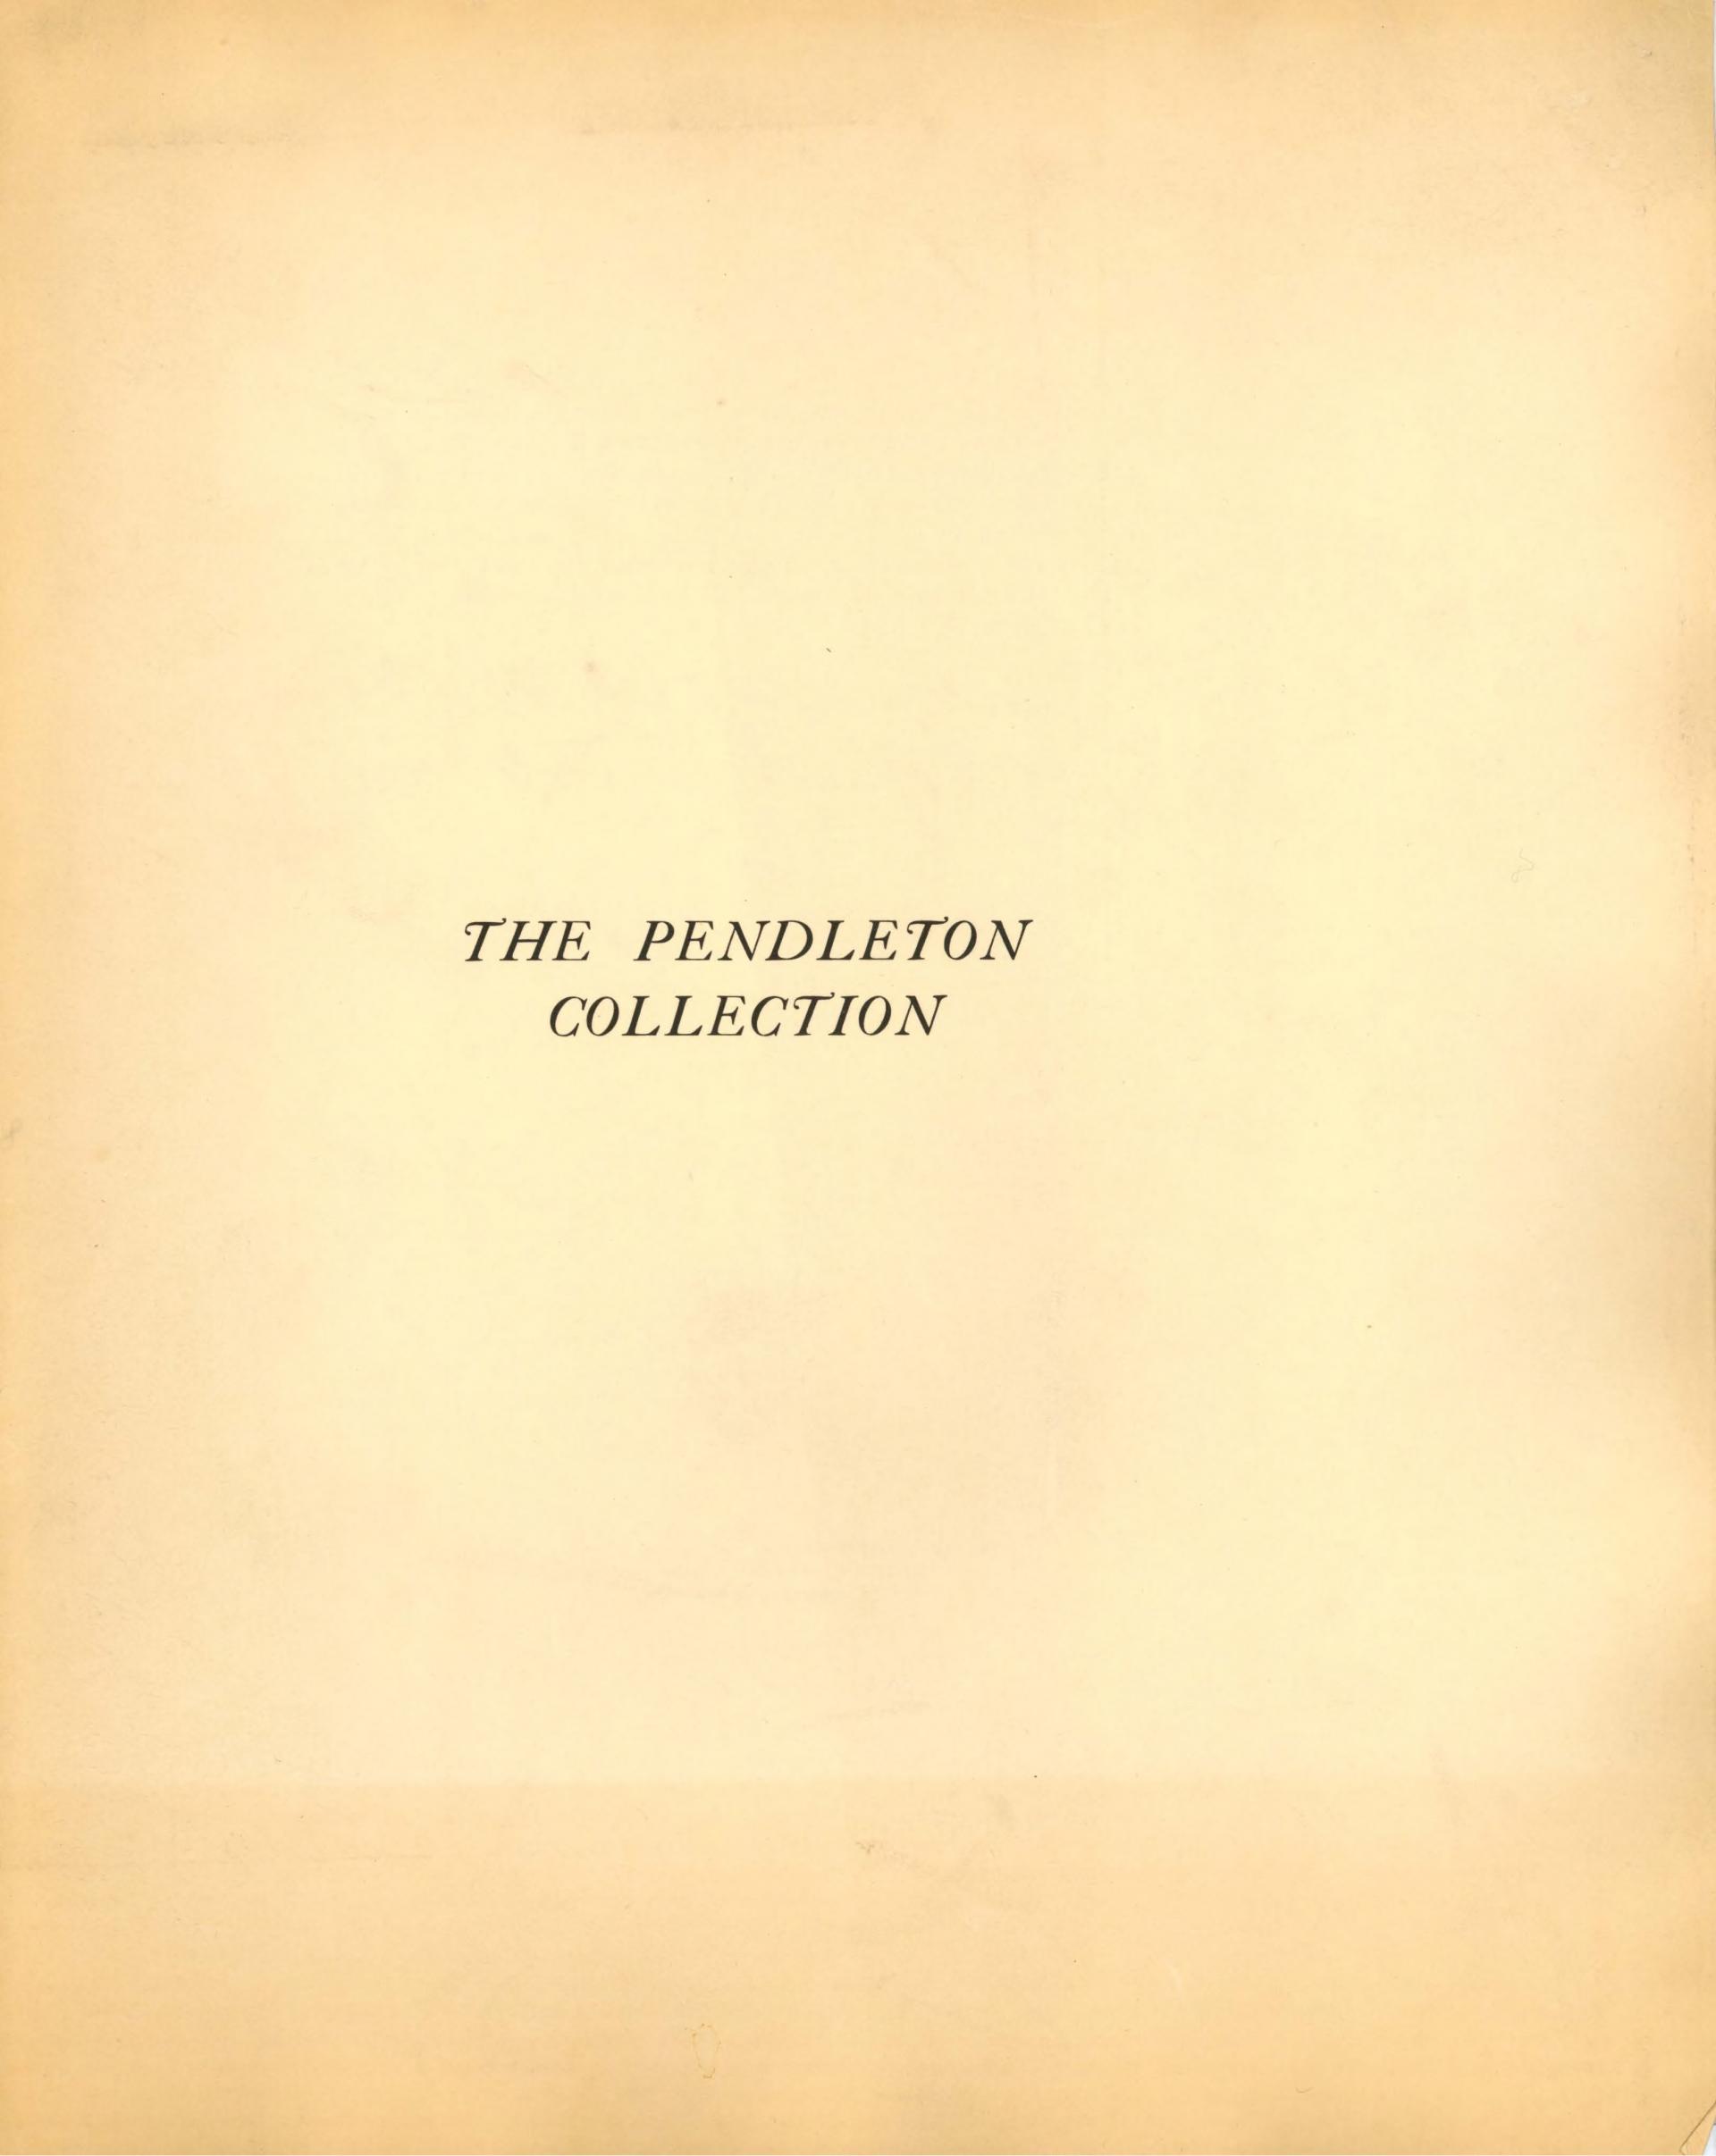 The Pendleton Collection book: Title page. Text: "The Pendleton Collection"